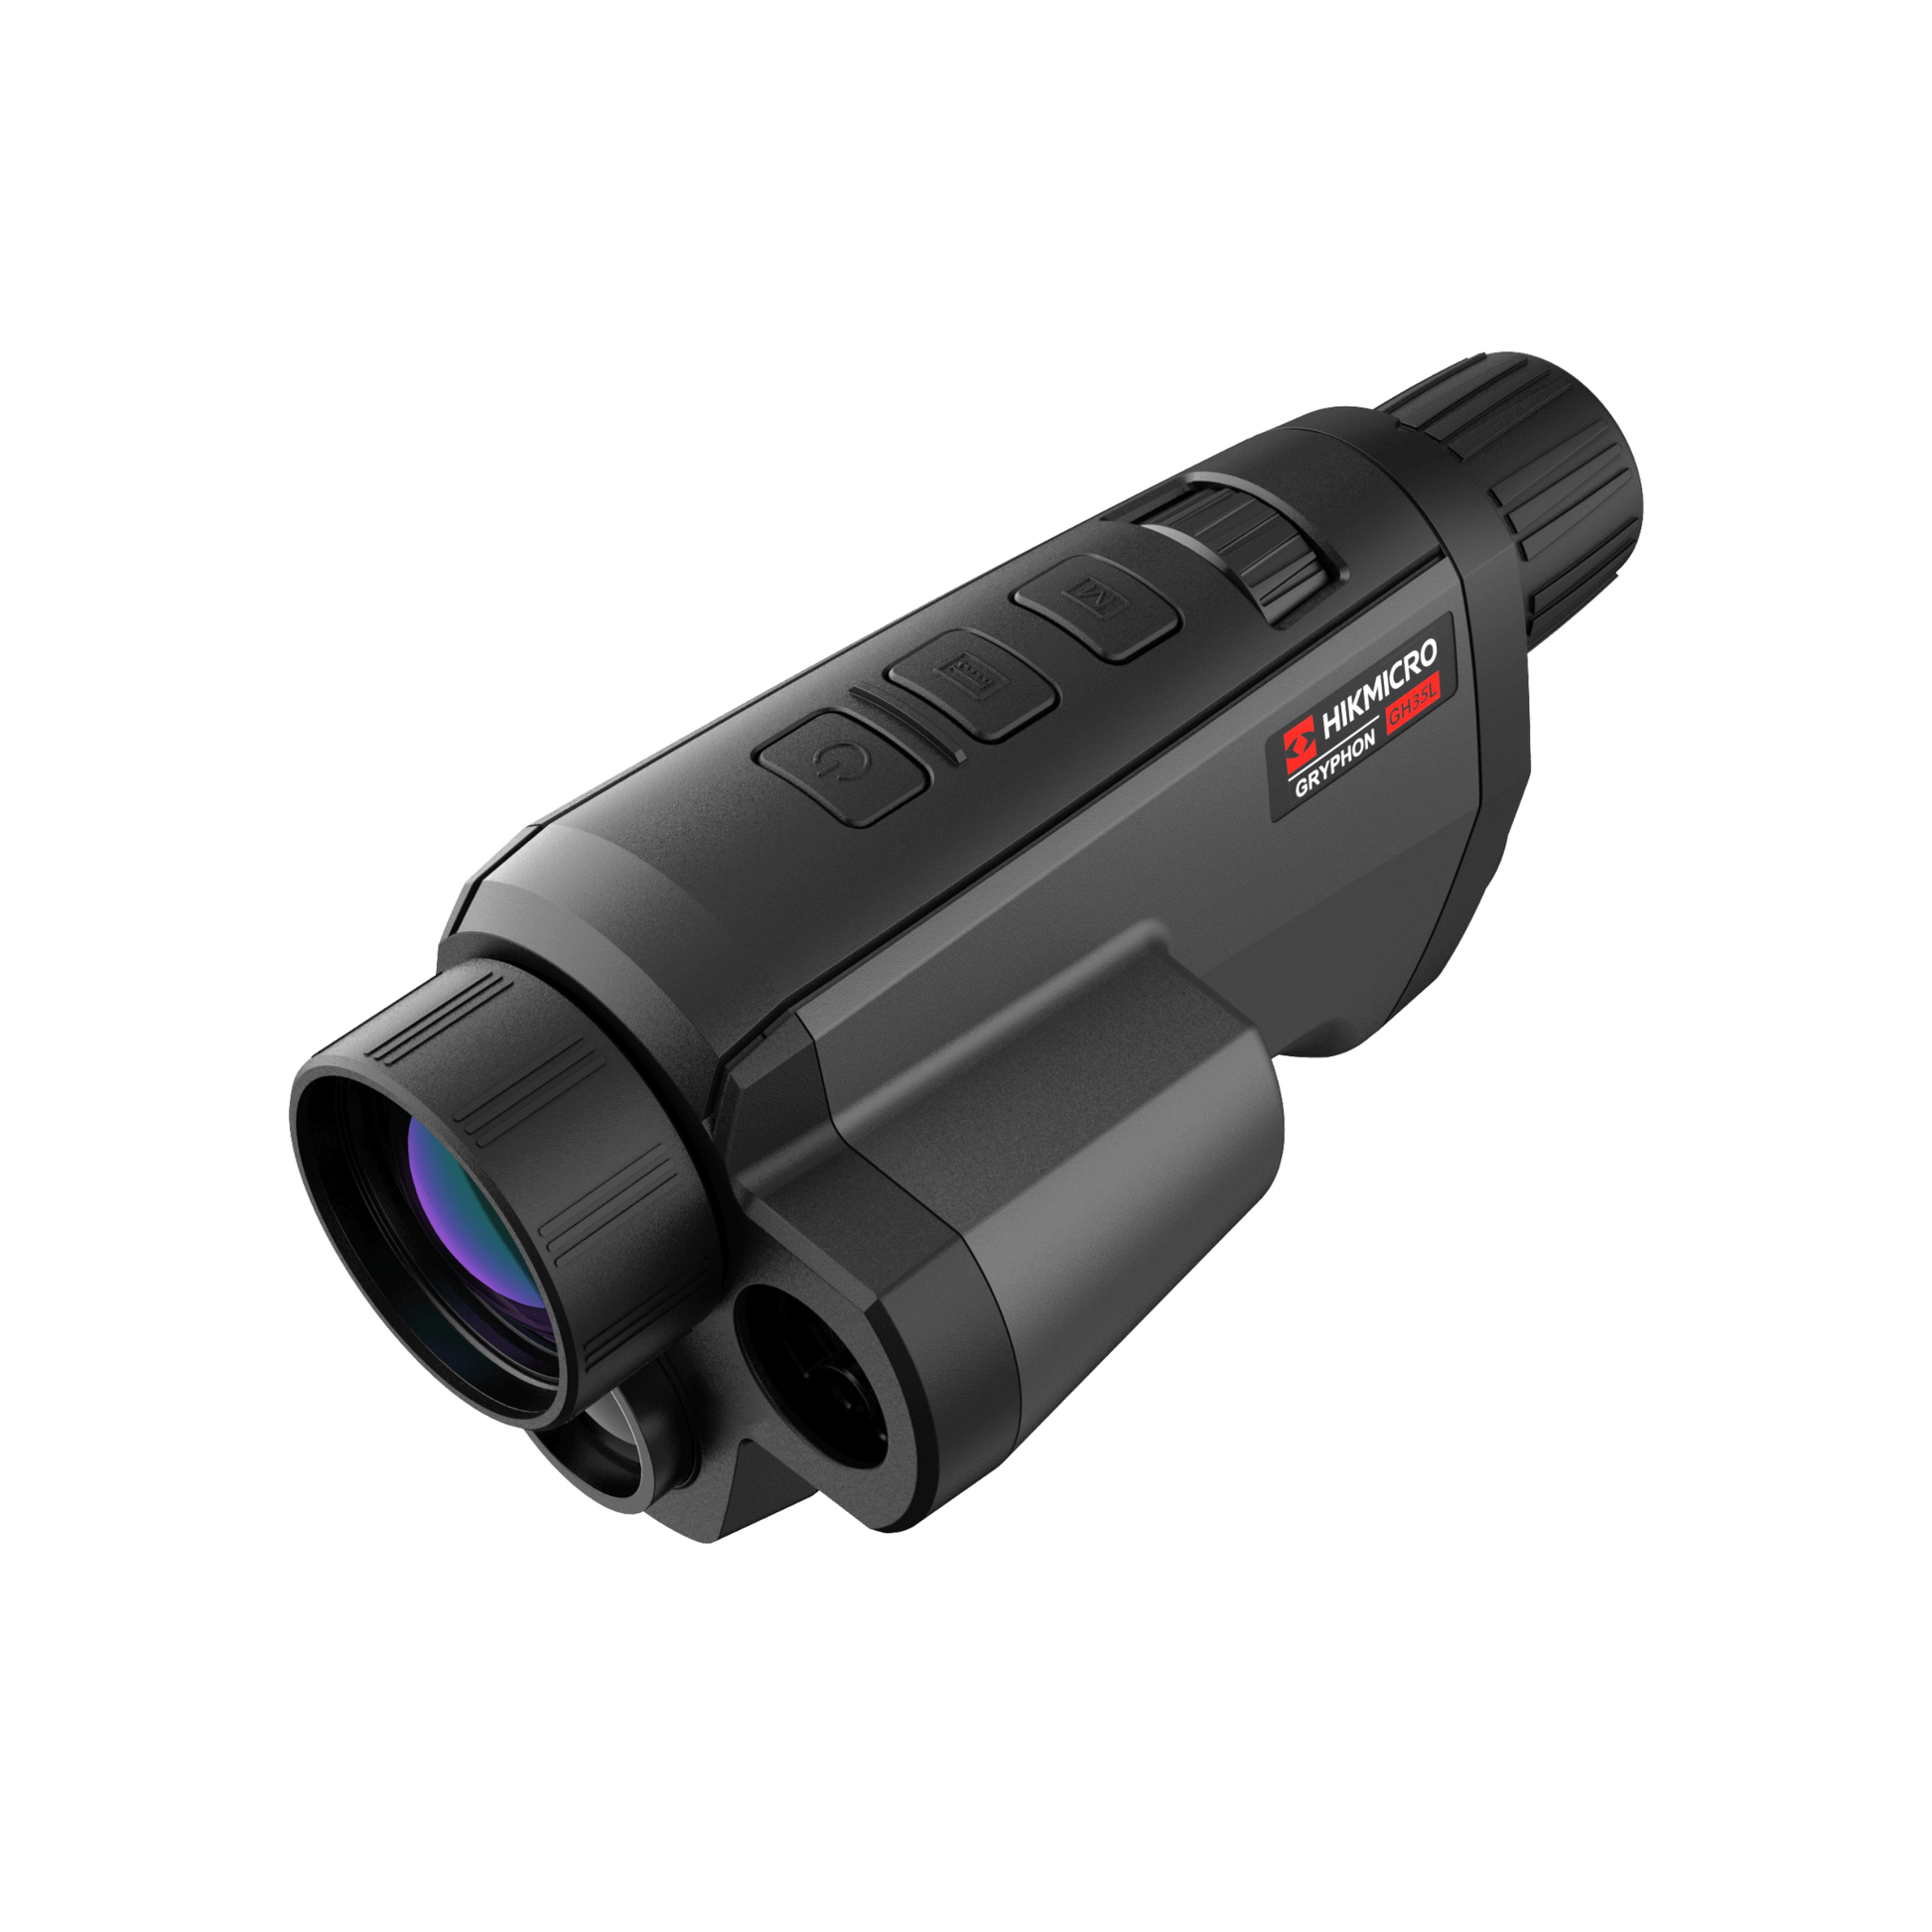 Cape Thermal imaging monocular for sale - HikMicro Gryphon GH35L Handheld thermal monocular front right view from above with laser range finder